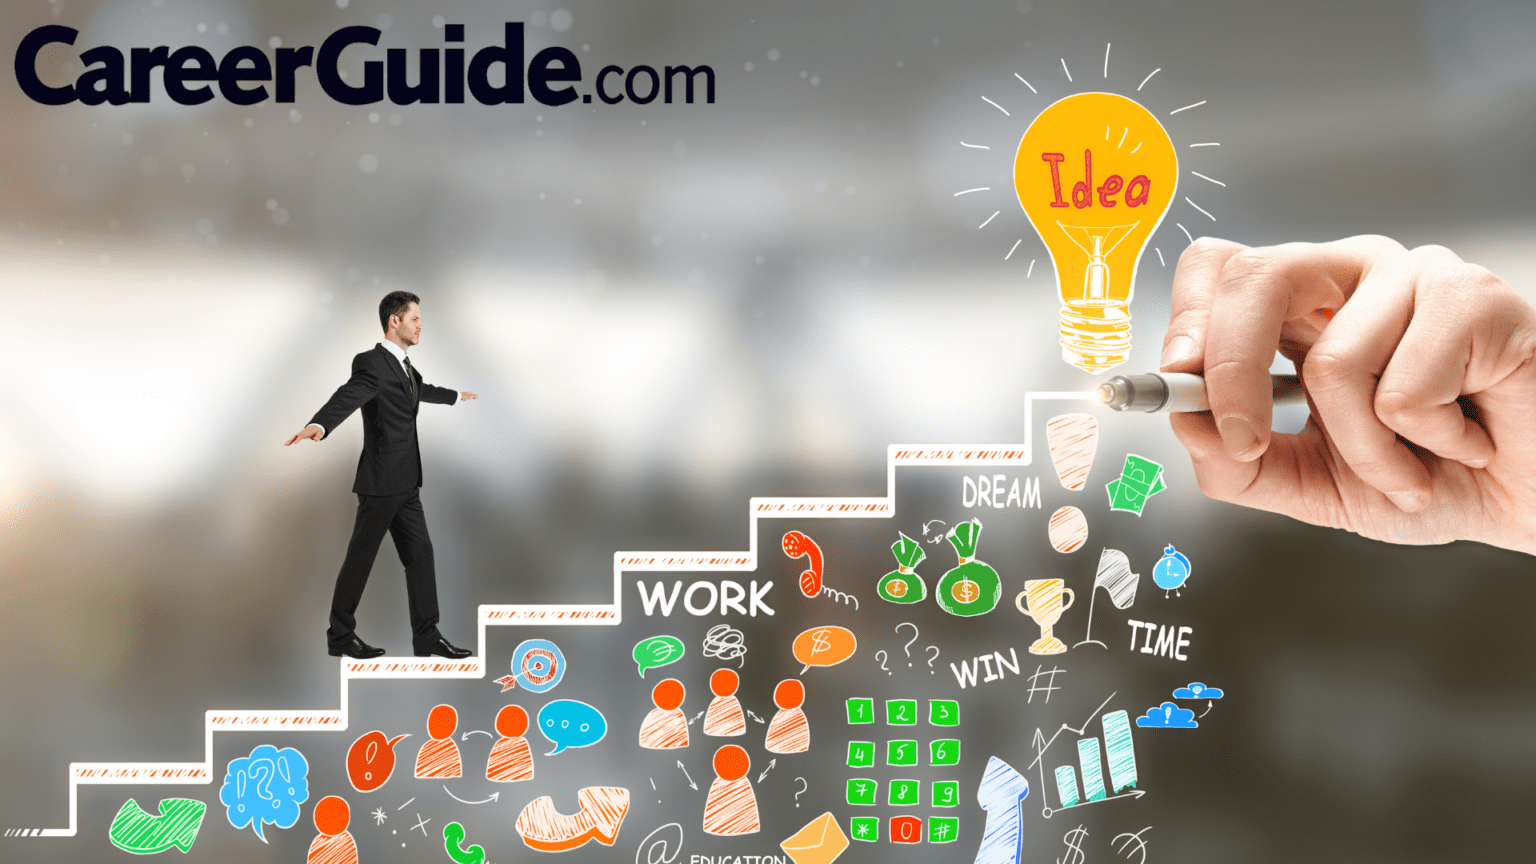 How to Start a Career Counseling Business in India - CareerGuide